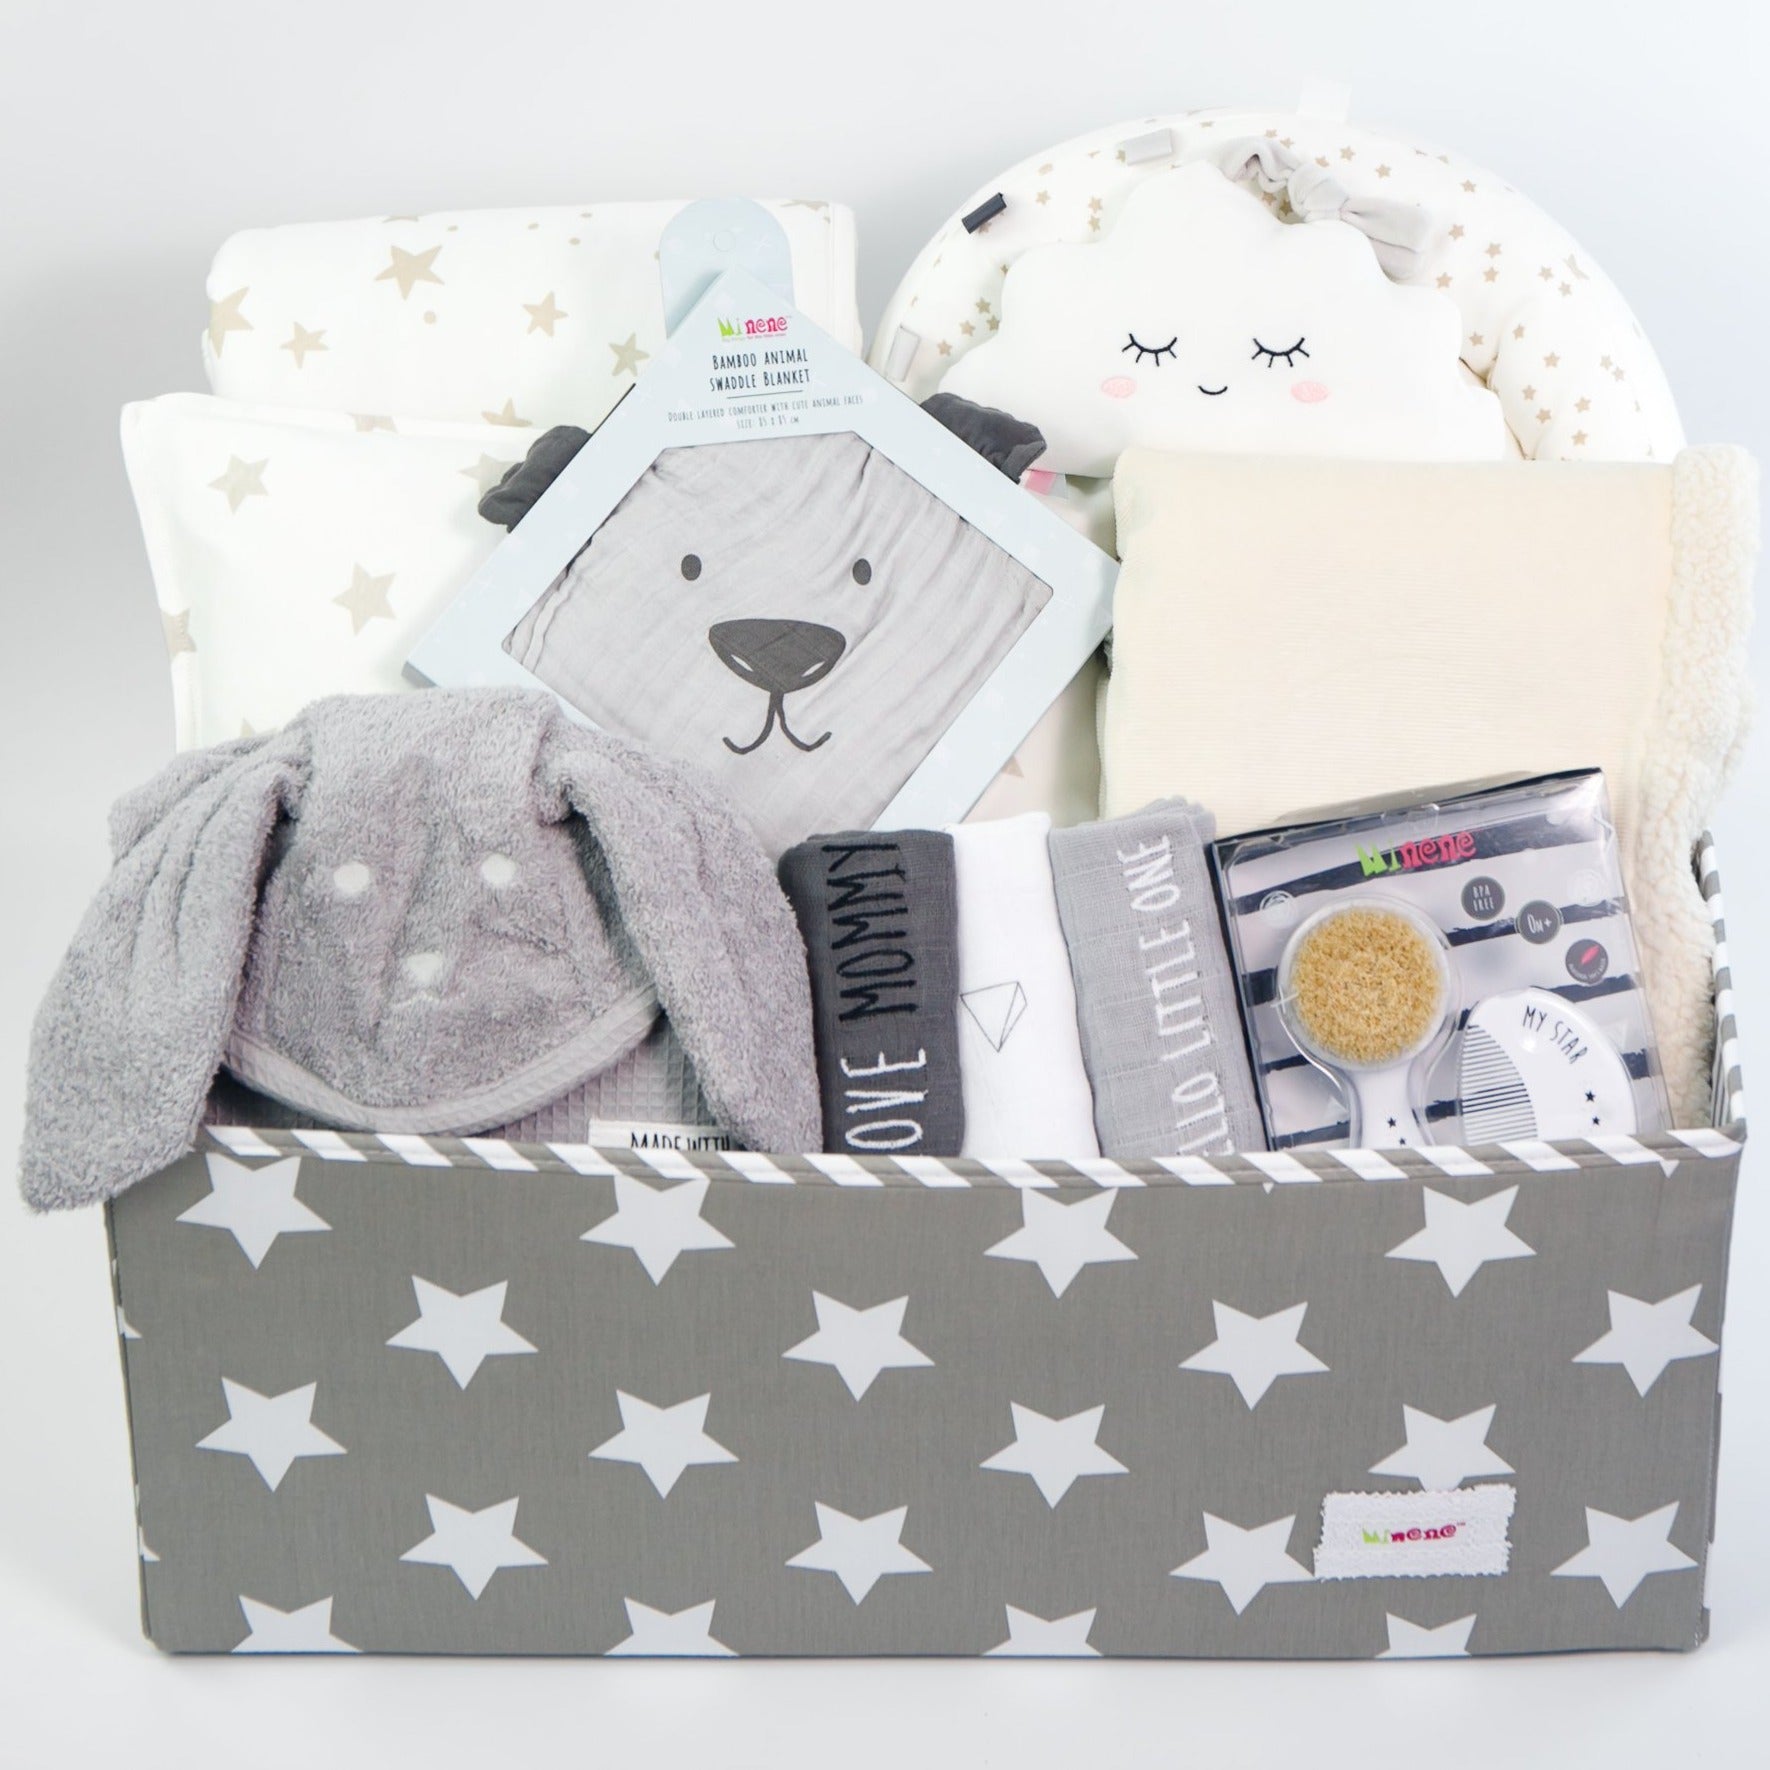 Luxury Newborn Gift Box For Your Loved One